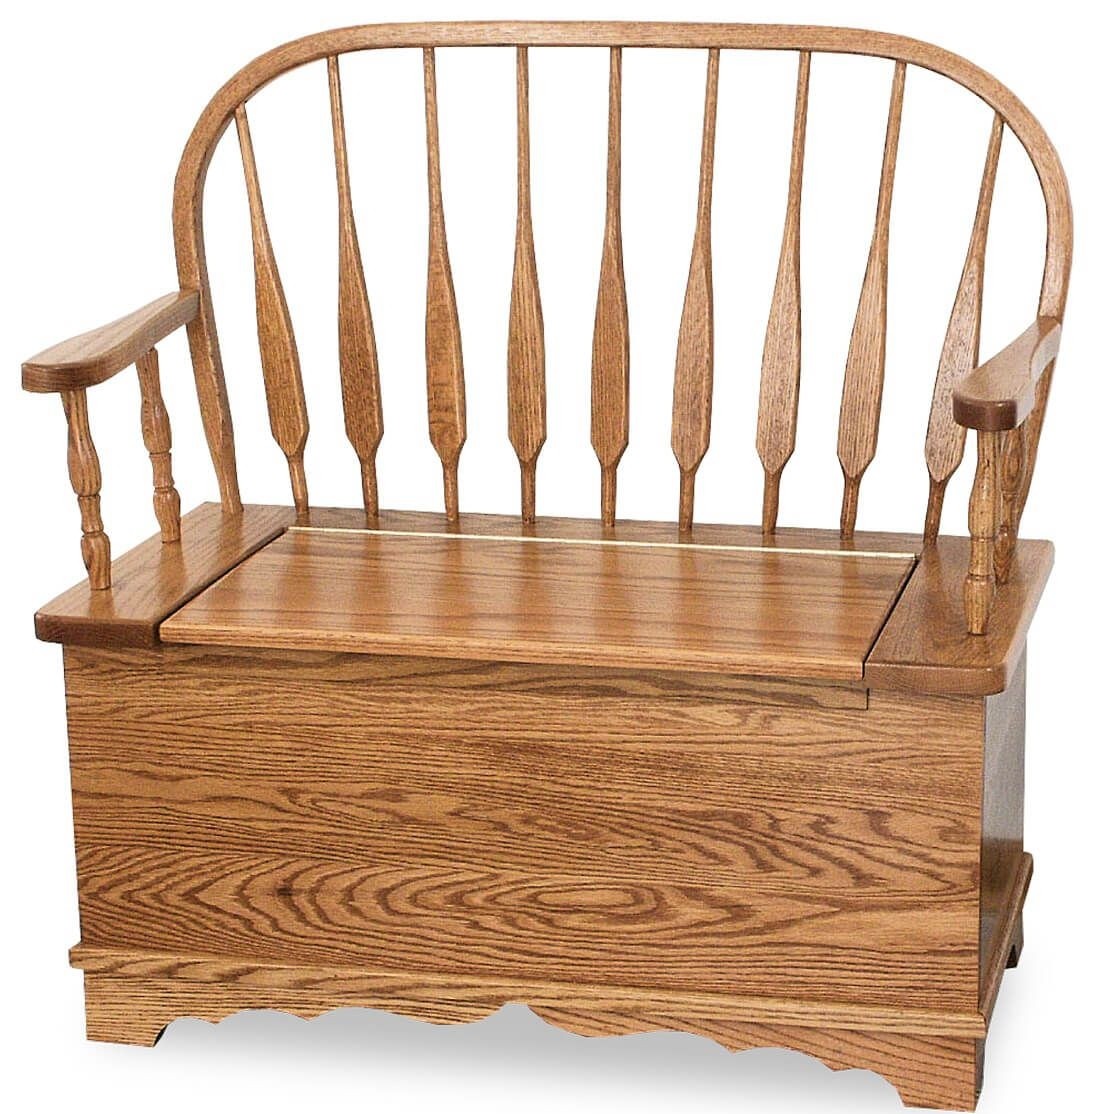 Dryden oak feather bow storage bench countryside amish